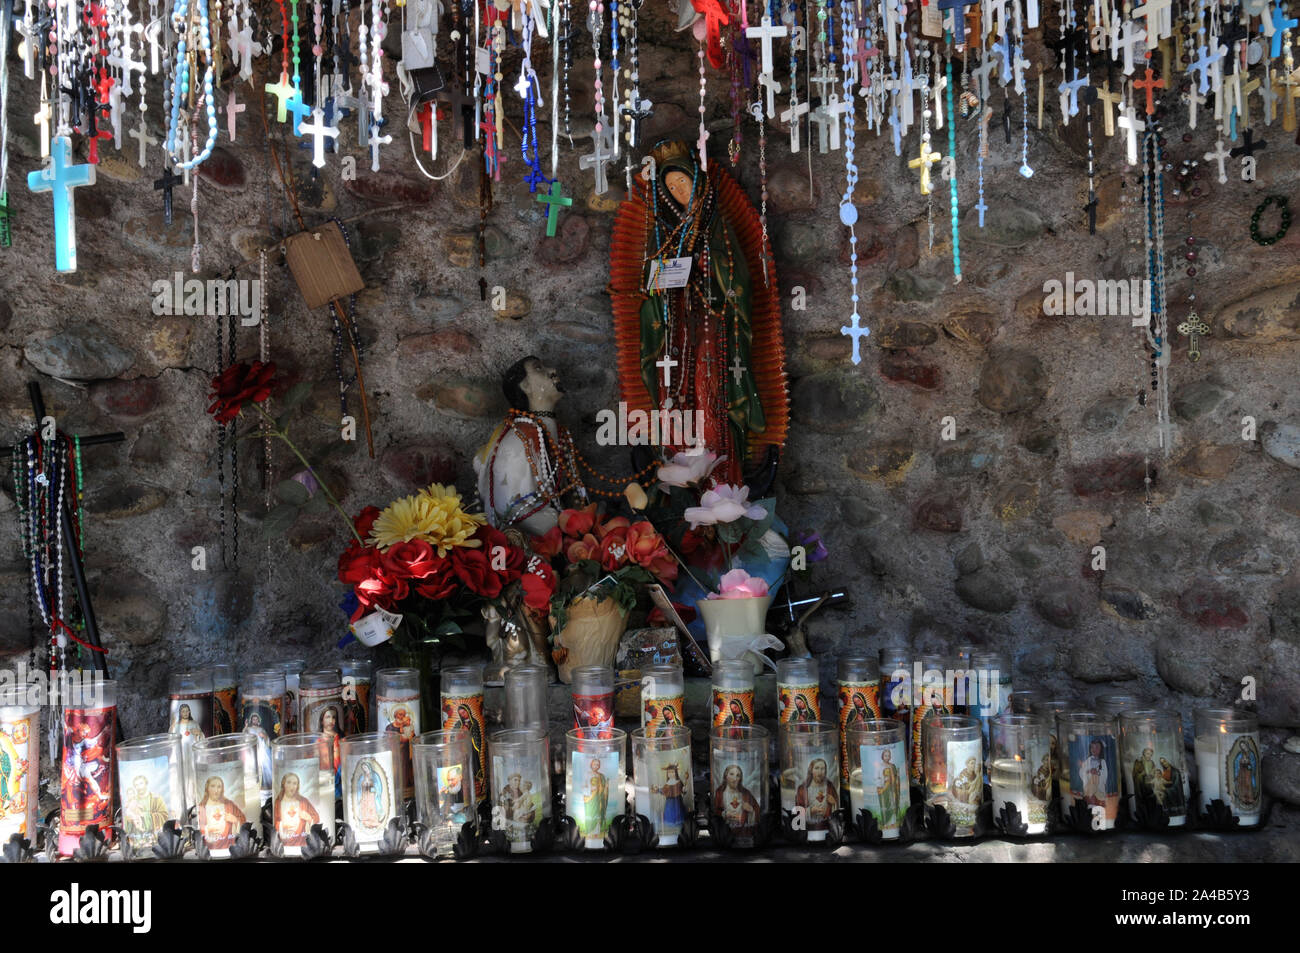 Offerings of crucifixes and candles in a small man made grotto at El Santuario de Chimayo, New Mexico. The church and grounds is an area of pilgrimage Stock Photo